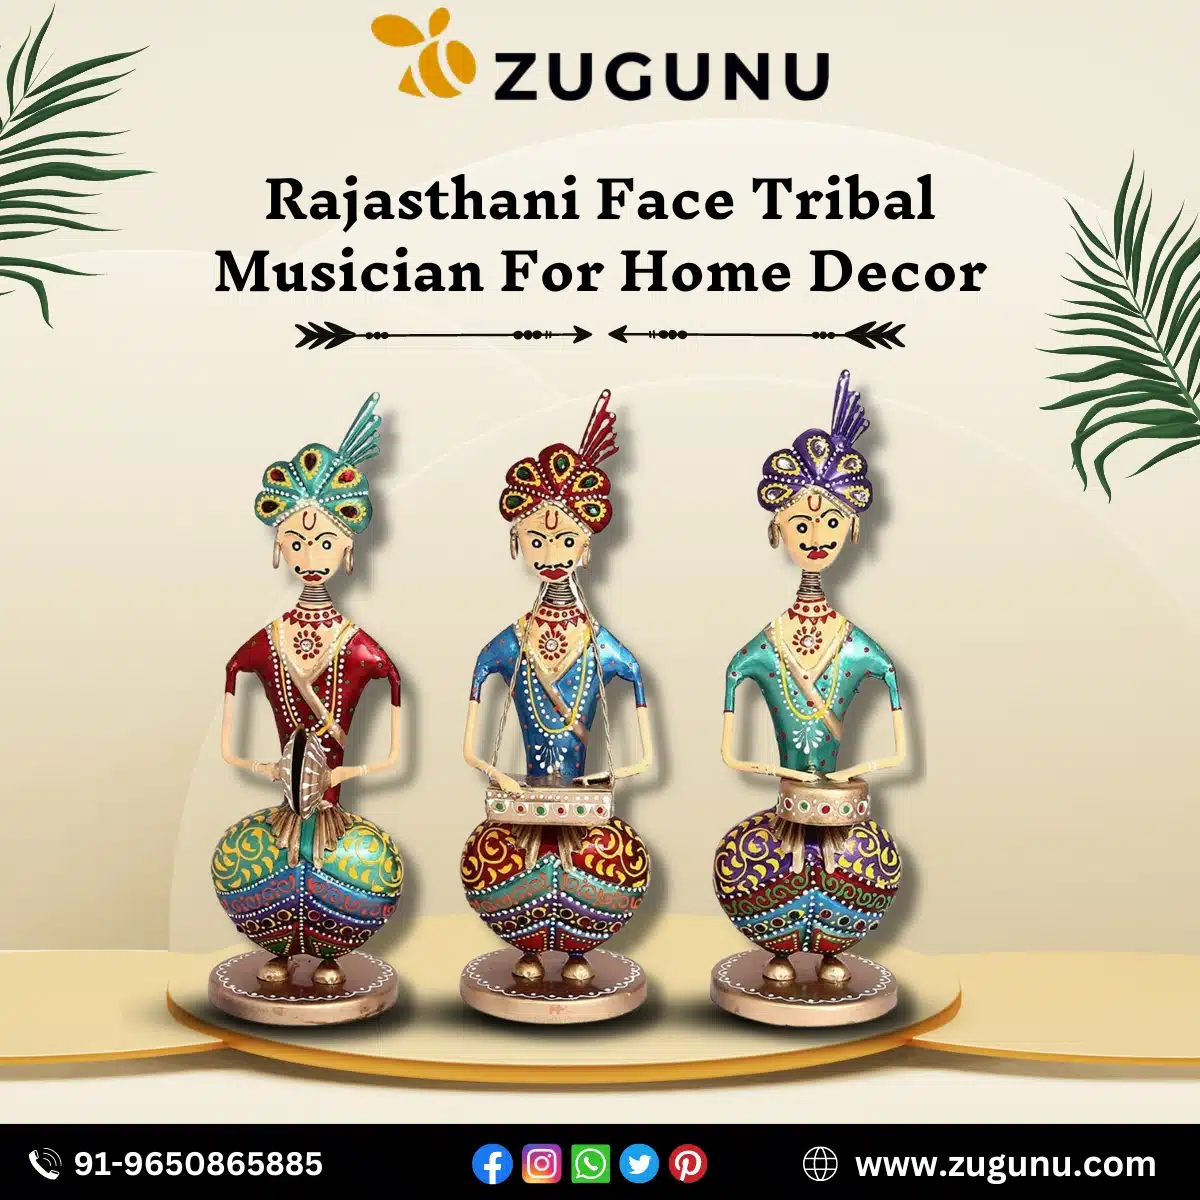 New Tribal Musician Home Decor With Rajasthani Face